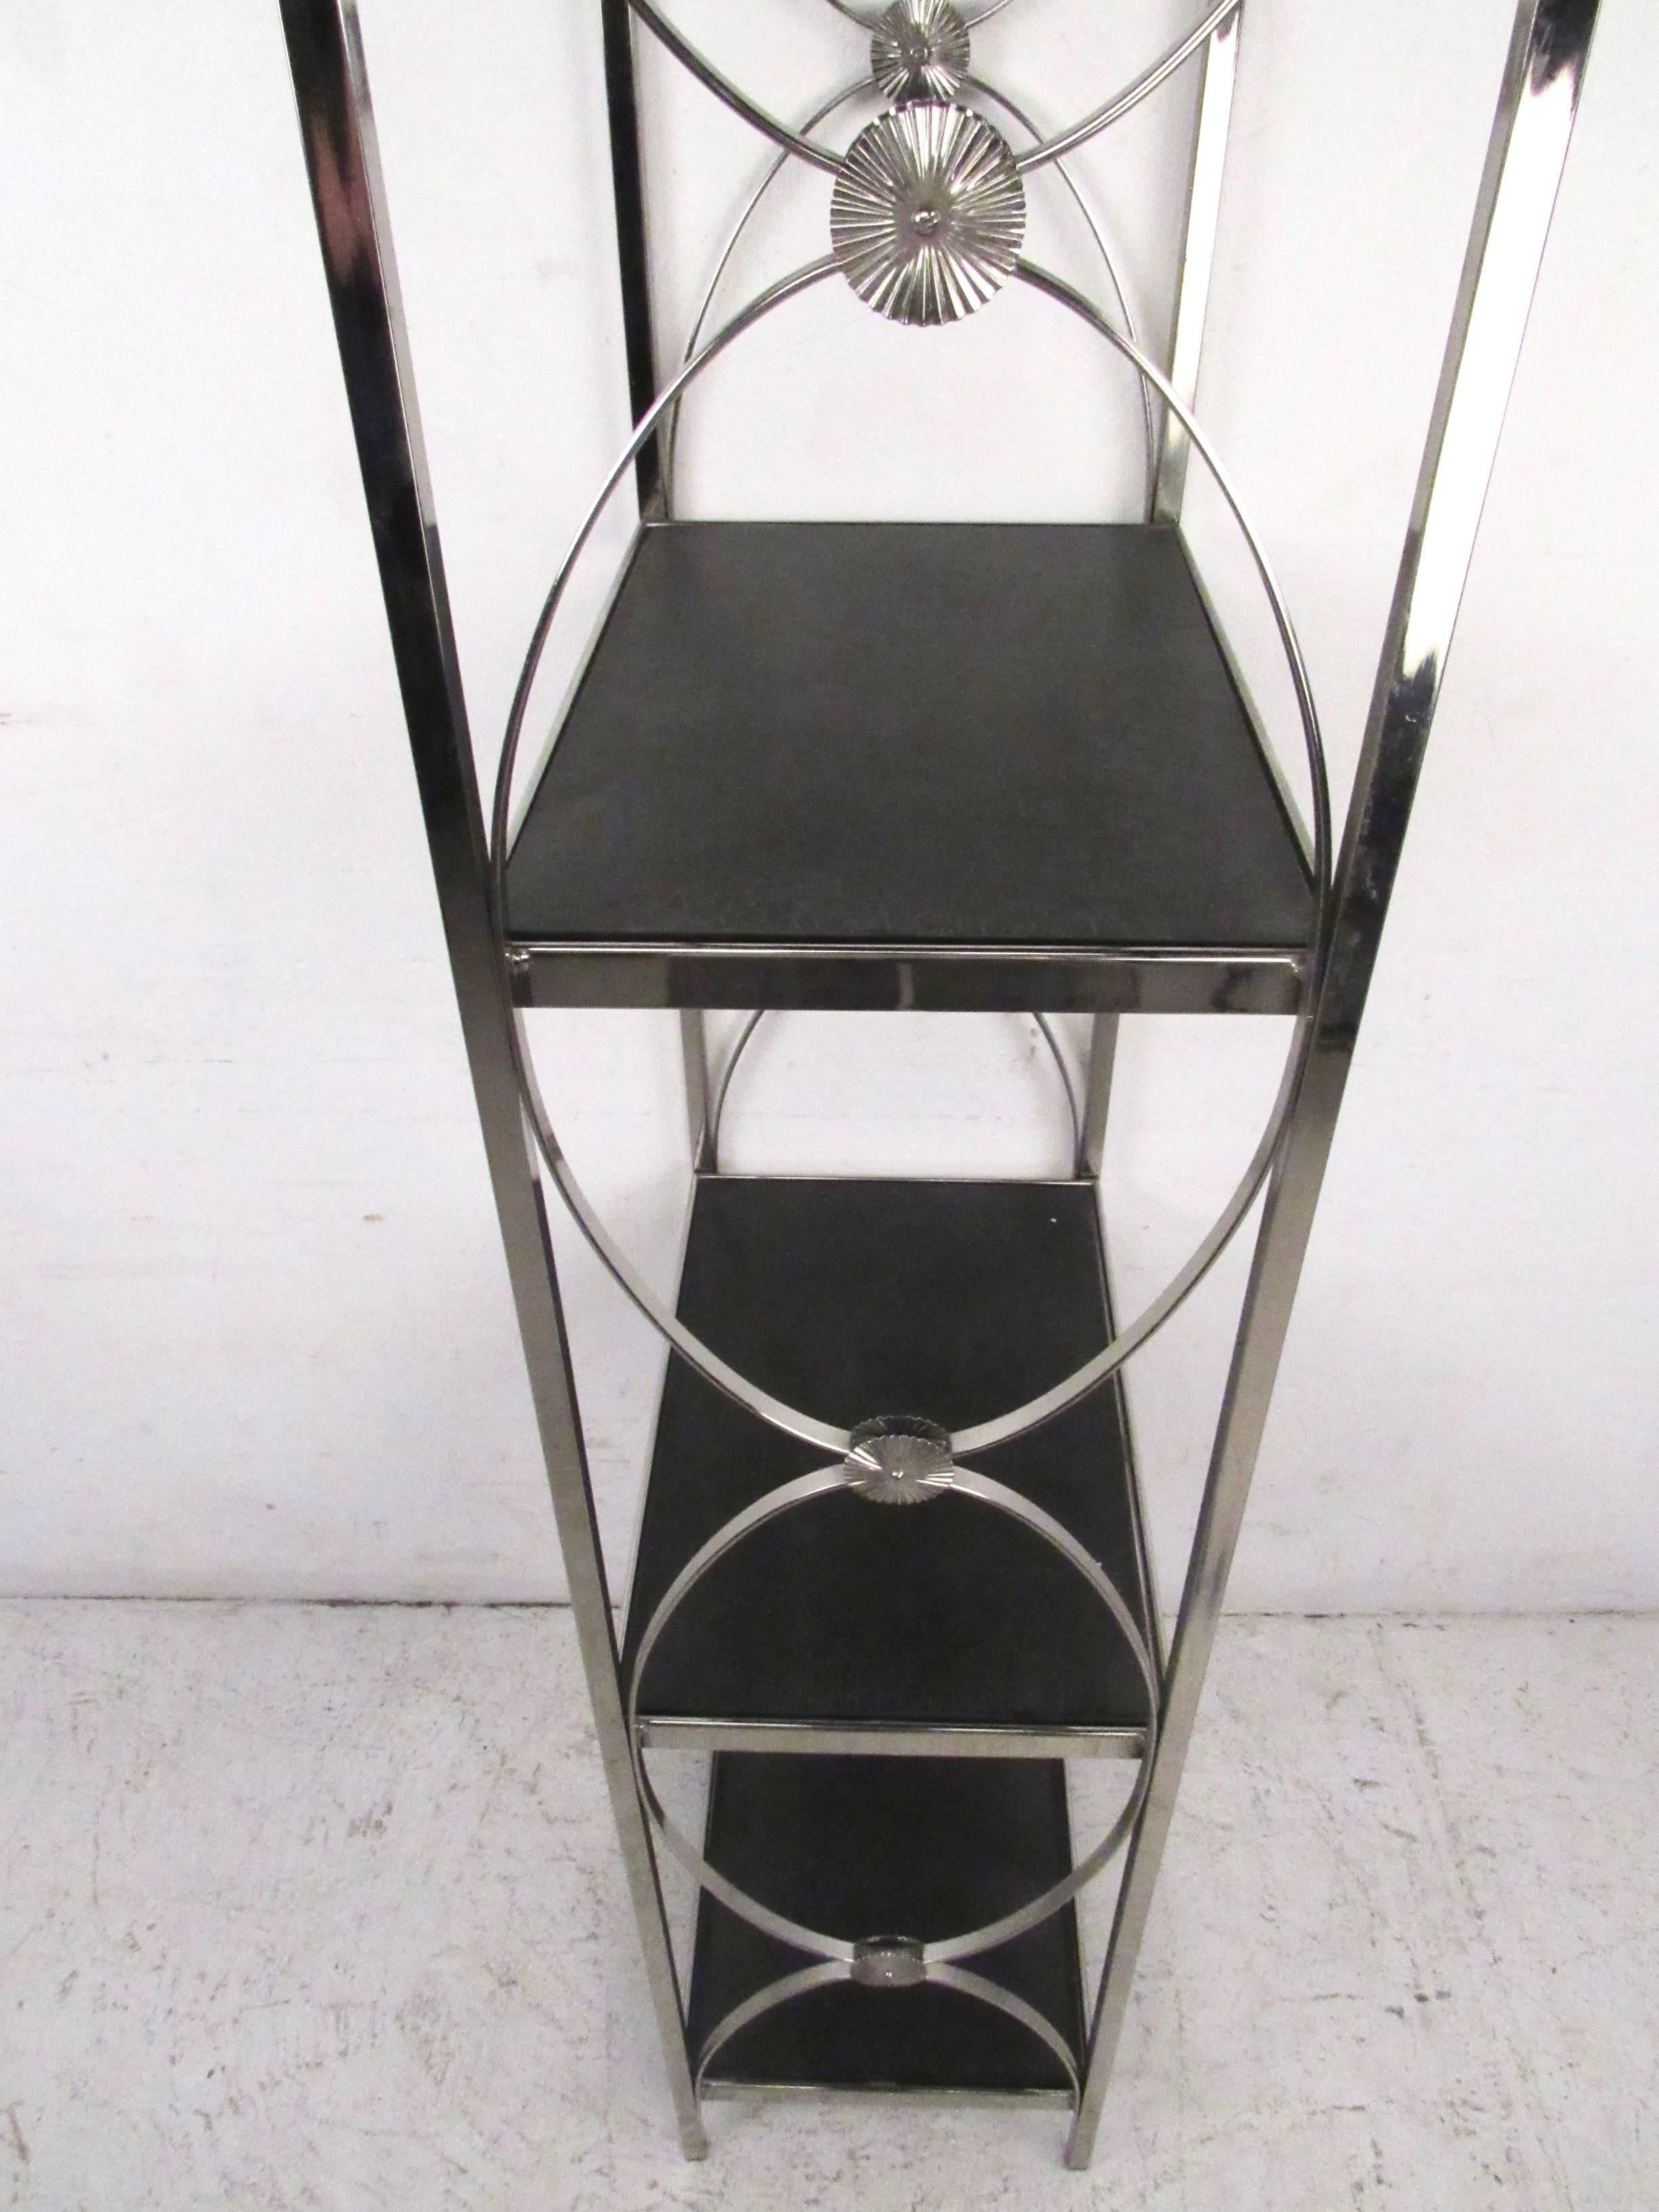 Contemporary Modern Decorative Chrome Etagere Display Shelf In Good Condition For Sale In Brooklyn, NY